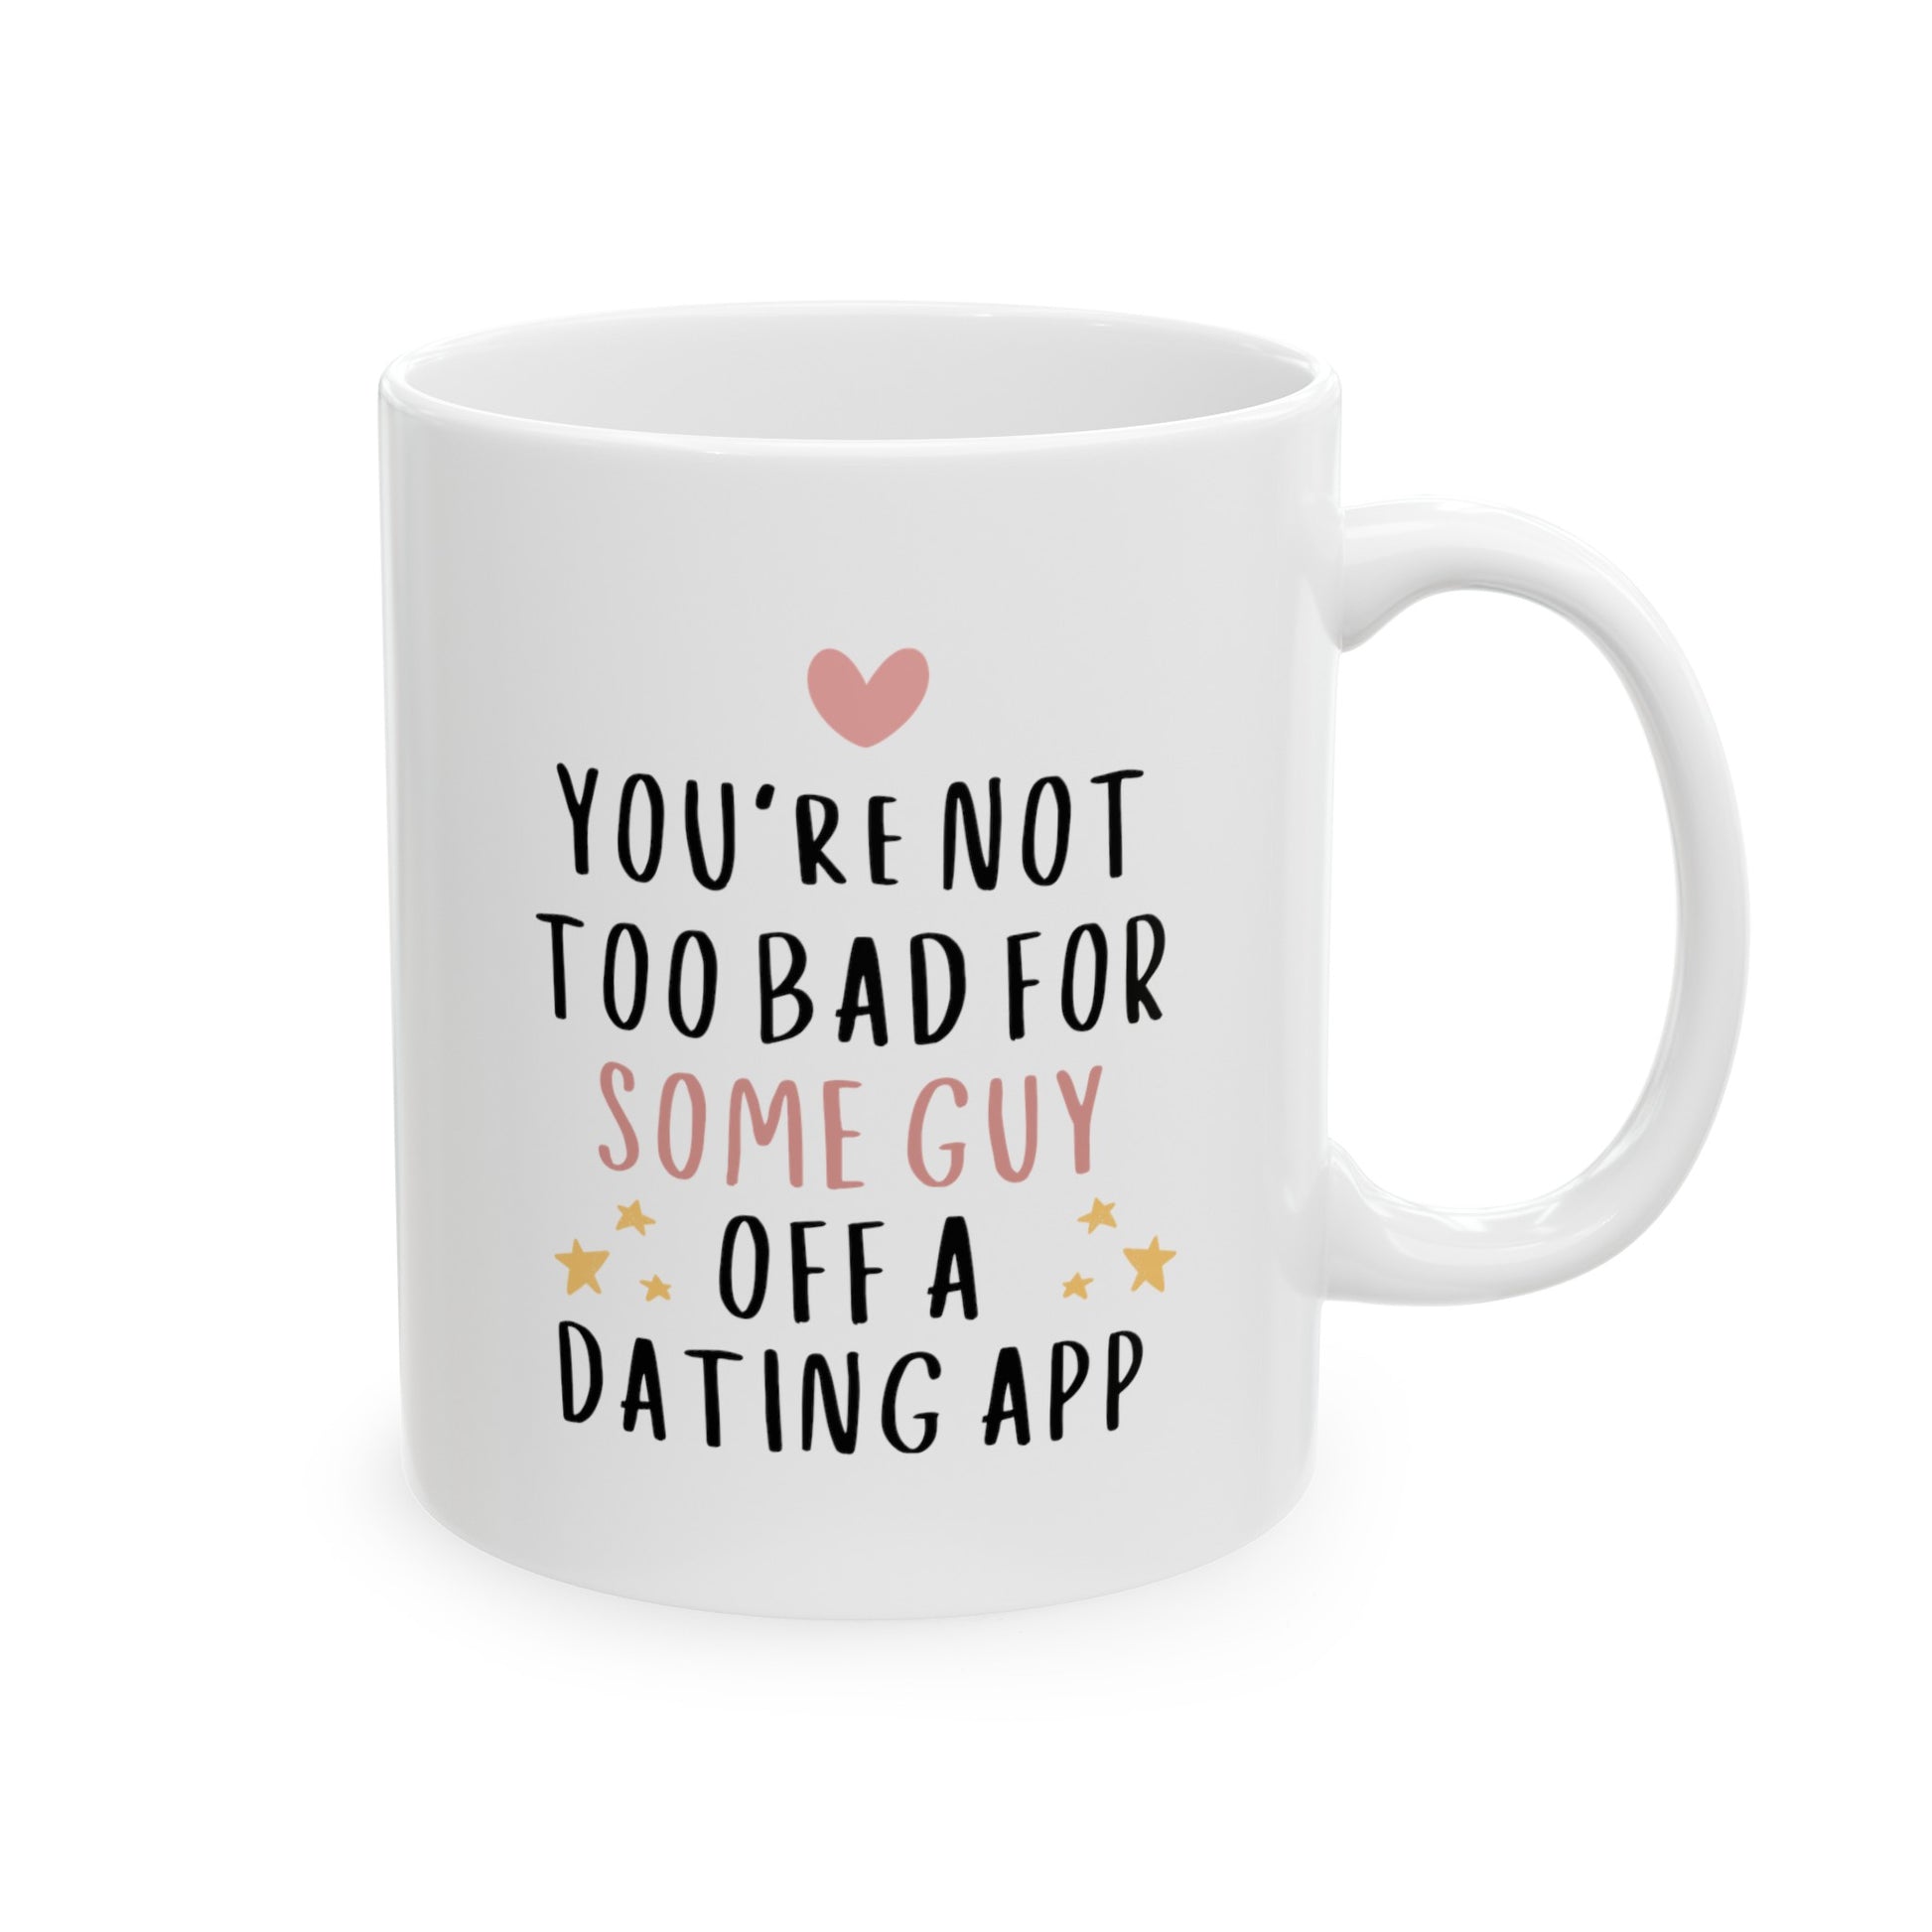 You're Not Too Bad For Some Guy Off A Dating App 11oz white funny large coffee mug gift for boyfriend valentine's day him husband fiance anniversary internet from girlfriend wife waveywares wavey wares wavywares wavy wares